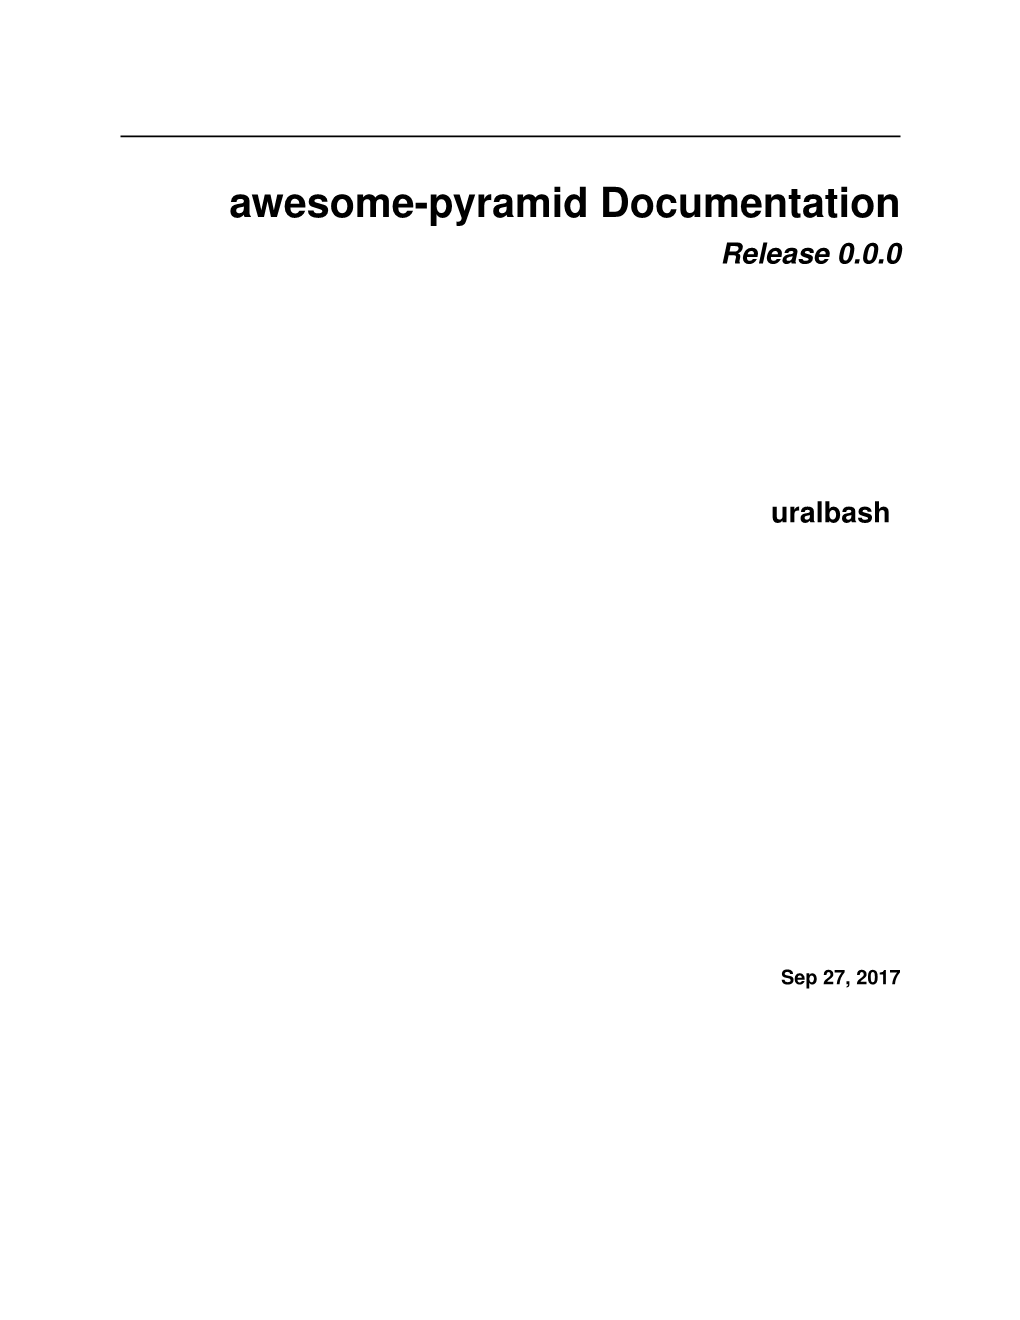 Awesome-Pyramid Documentation Release 0.0.0